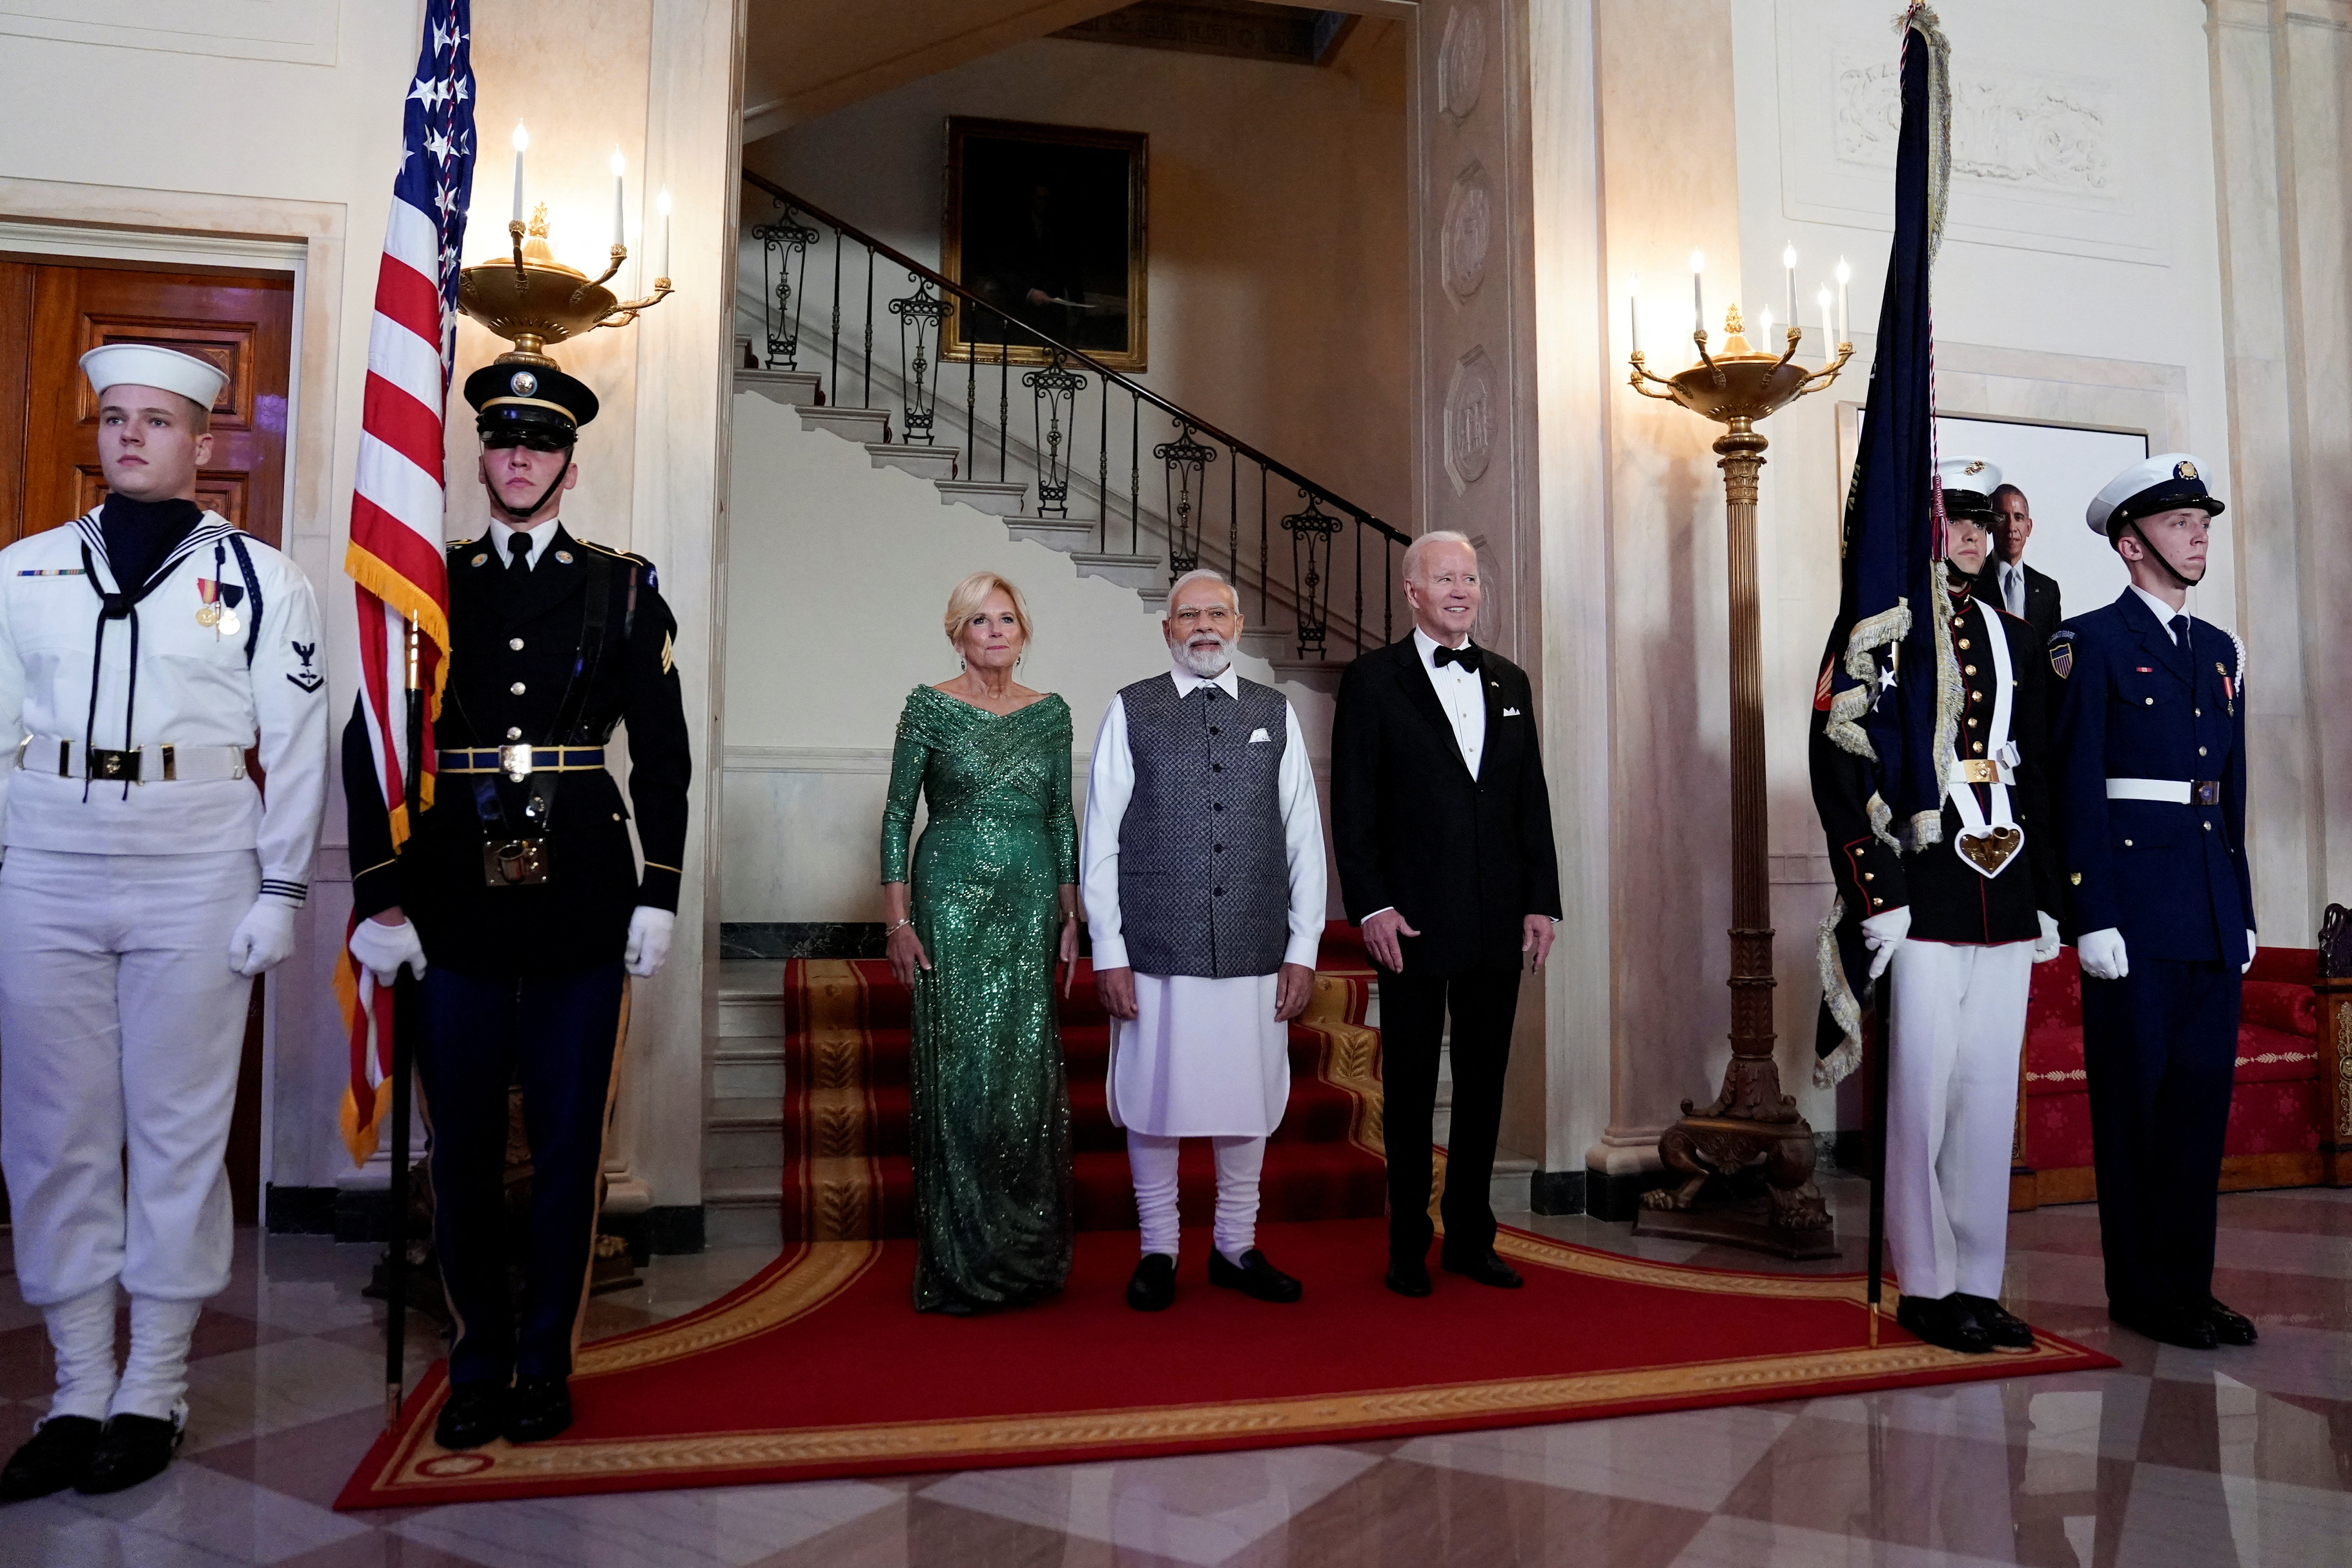 India's Prime Minister Modi wraps up official visit to United States 